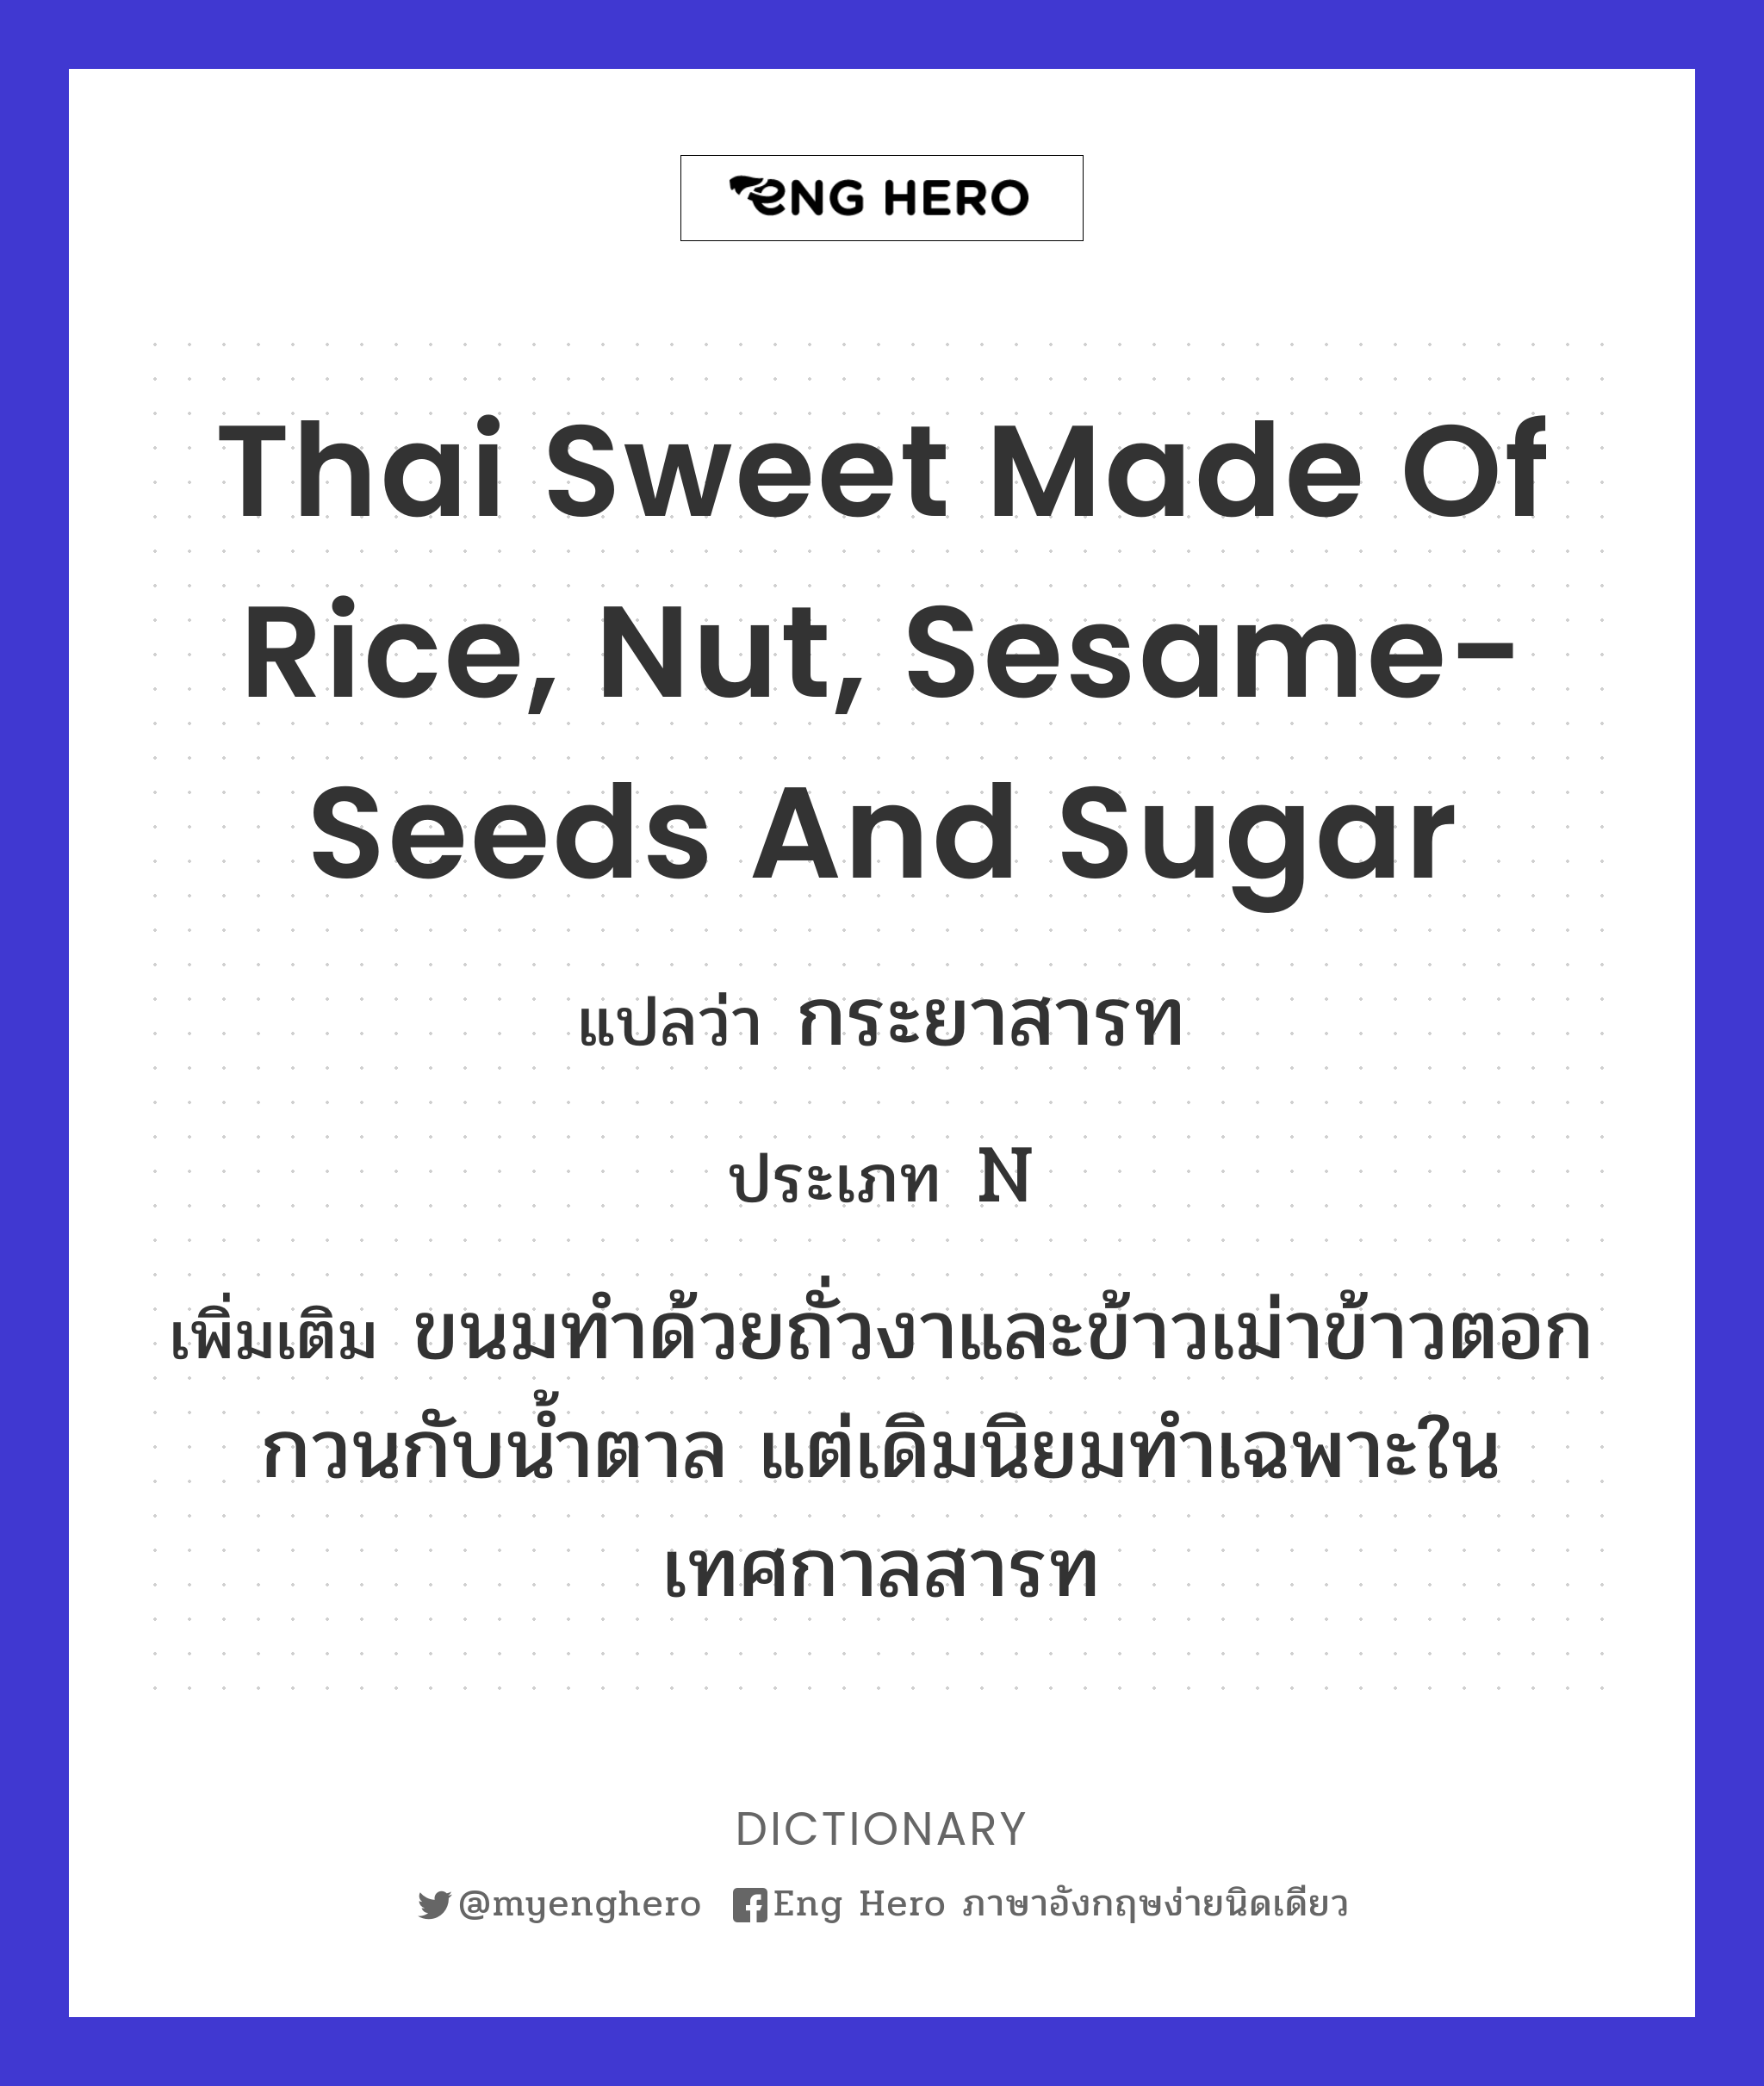 Thai sweet made of rice, nut, sesame-seeds and sugar